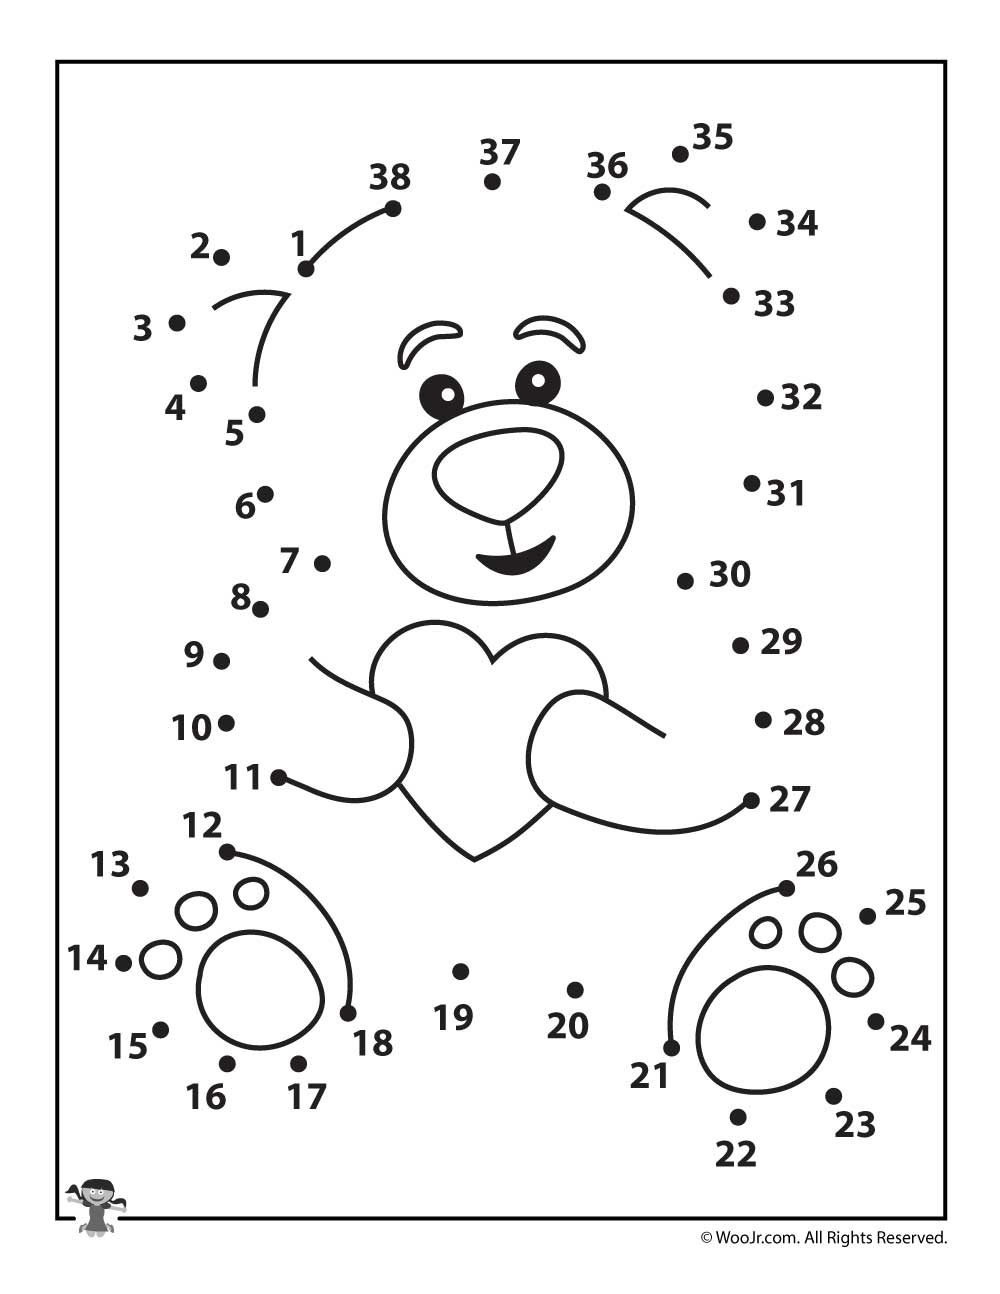 Free Printable Dot To Dot Puzzles For Kids